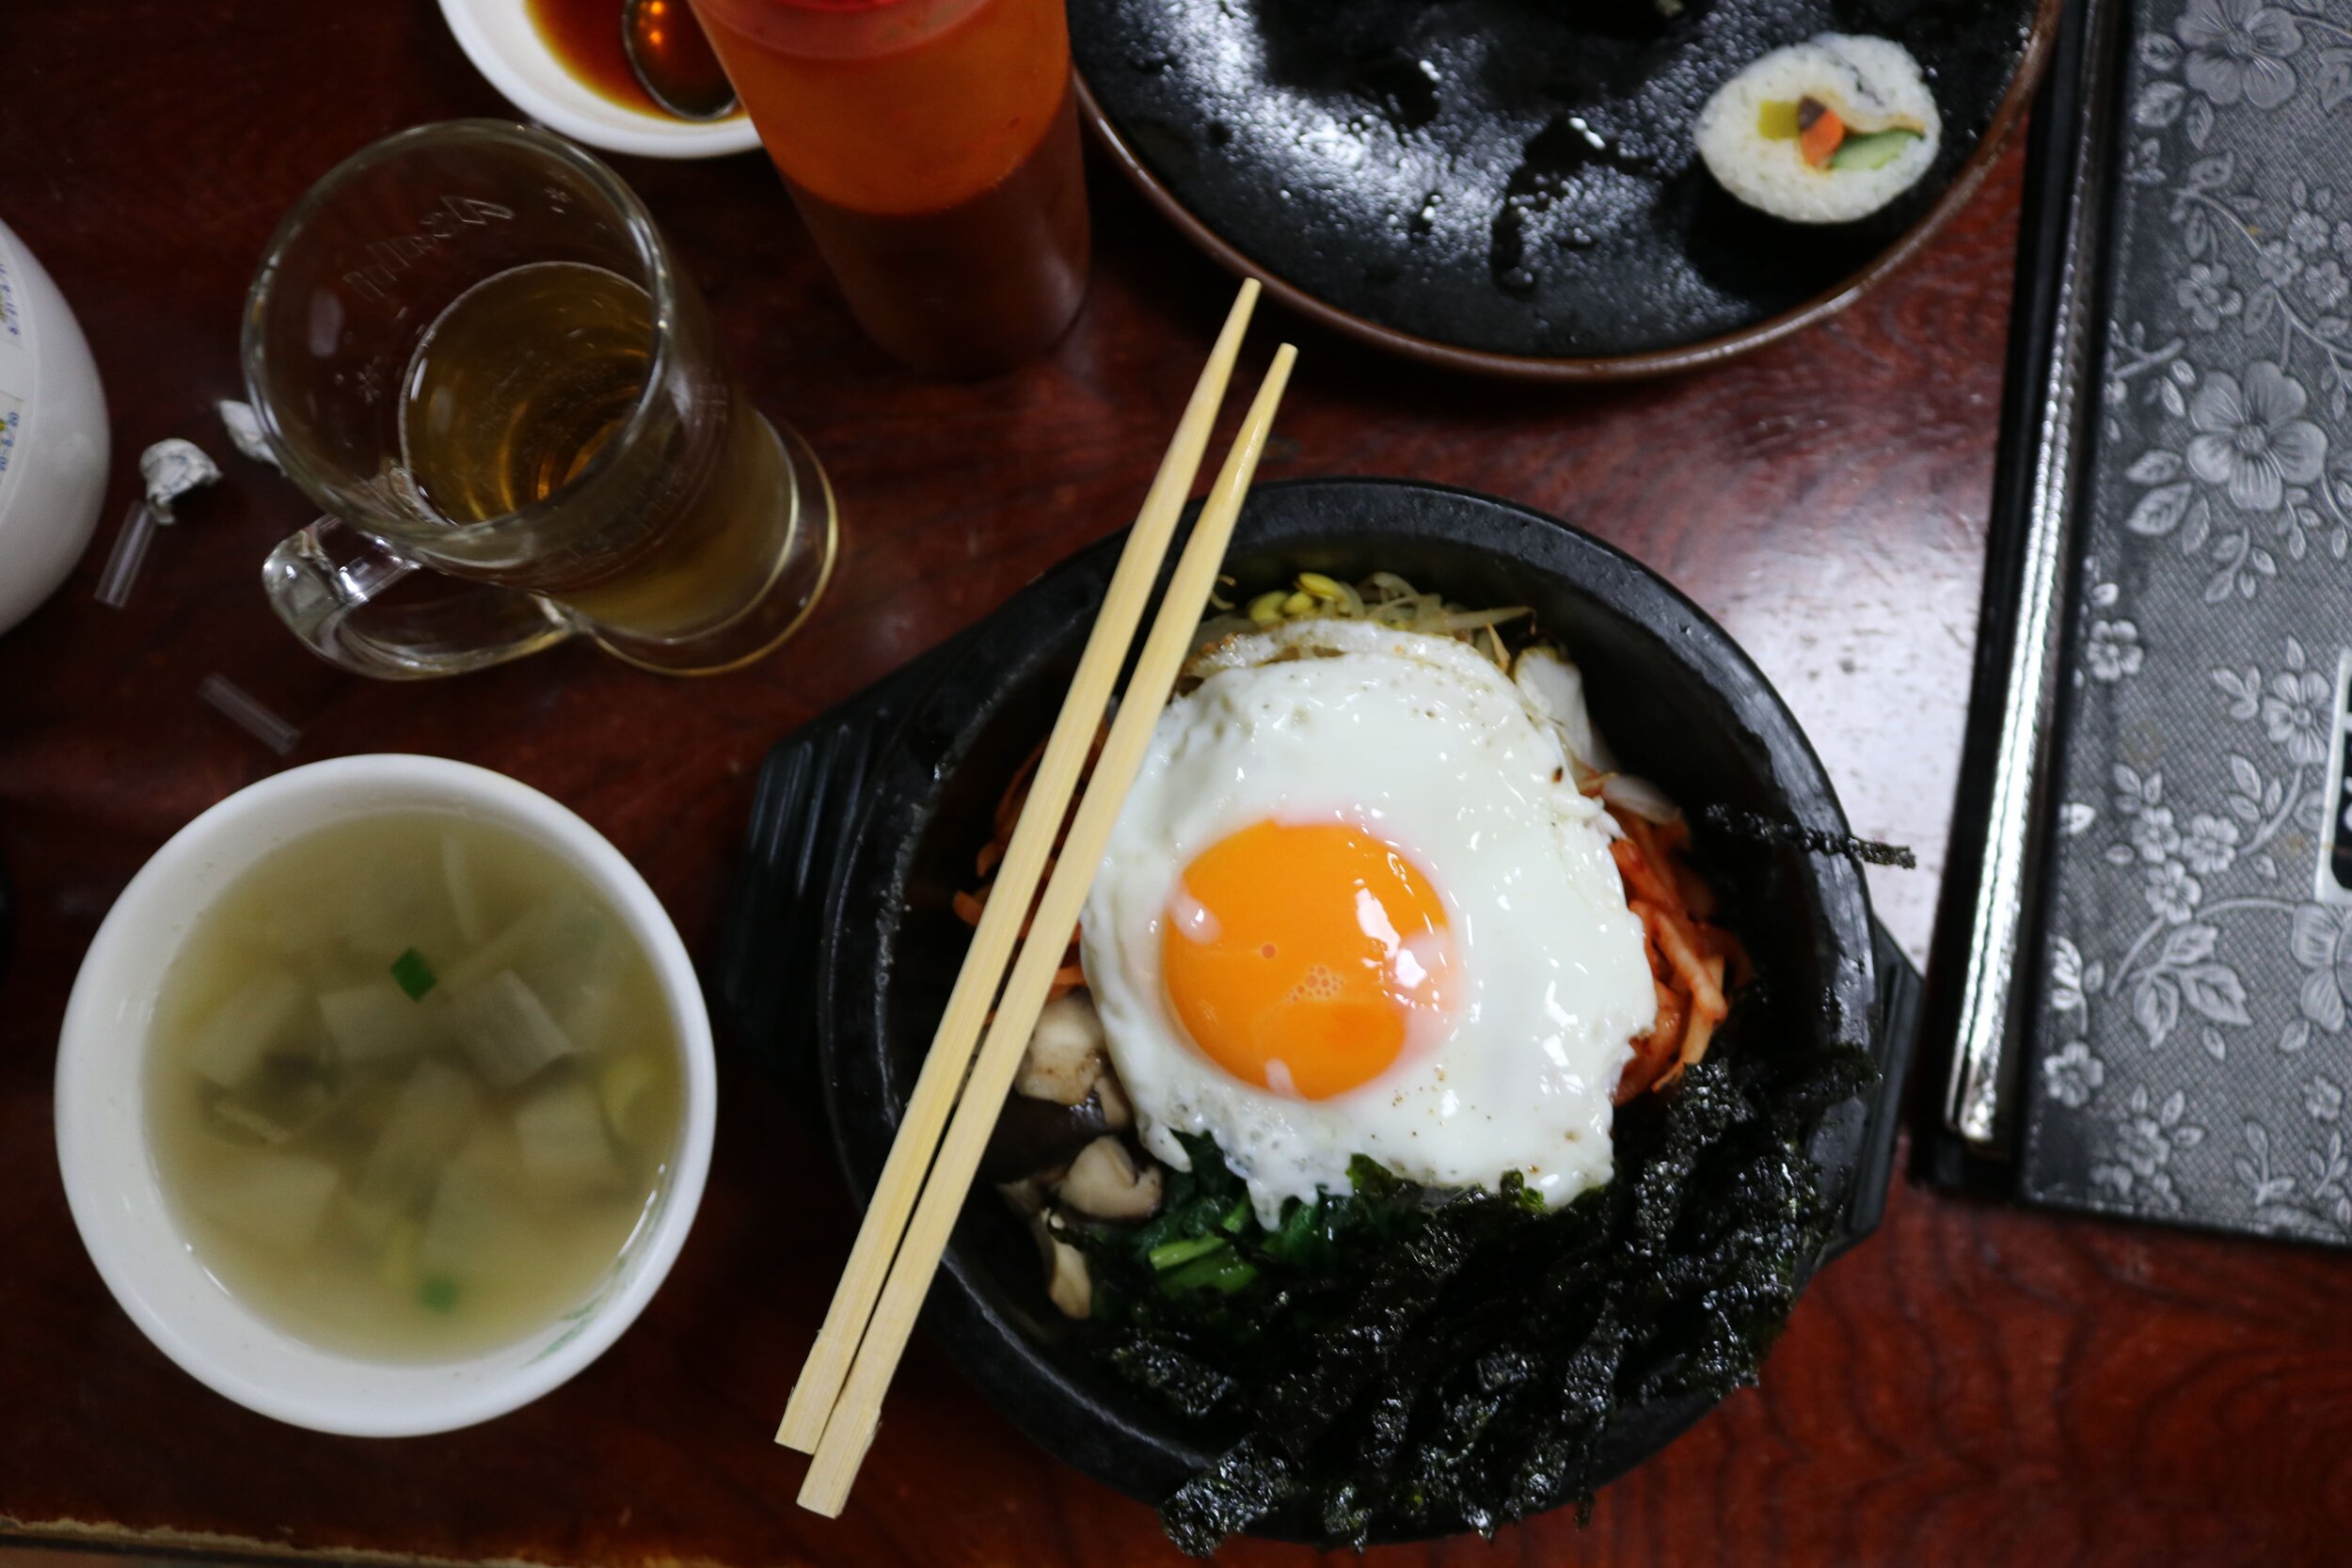 An egg in a bowl with wooden chopsticks resting on the top